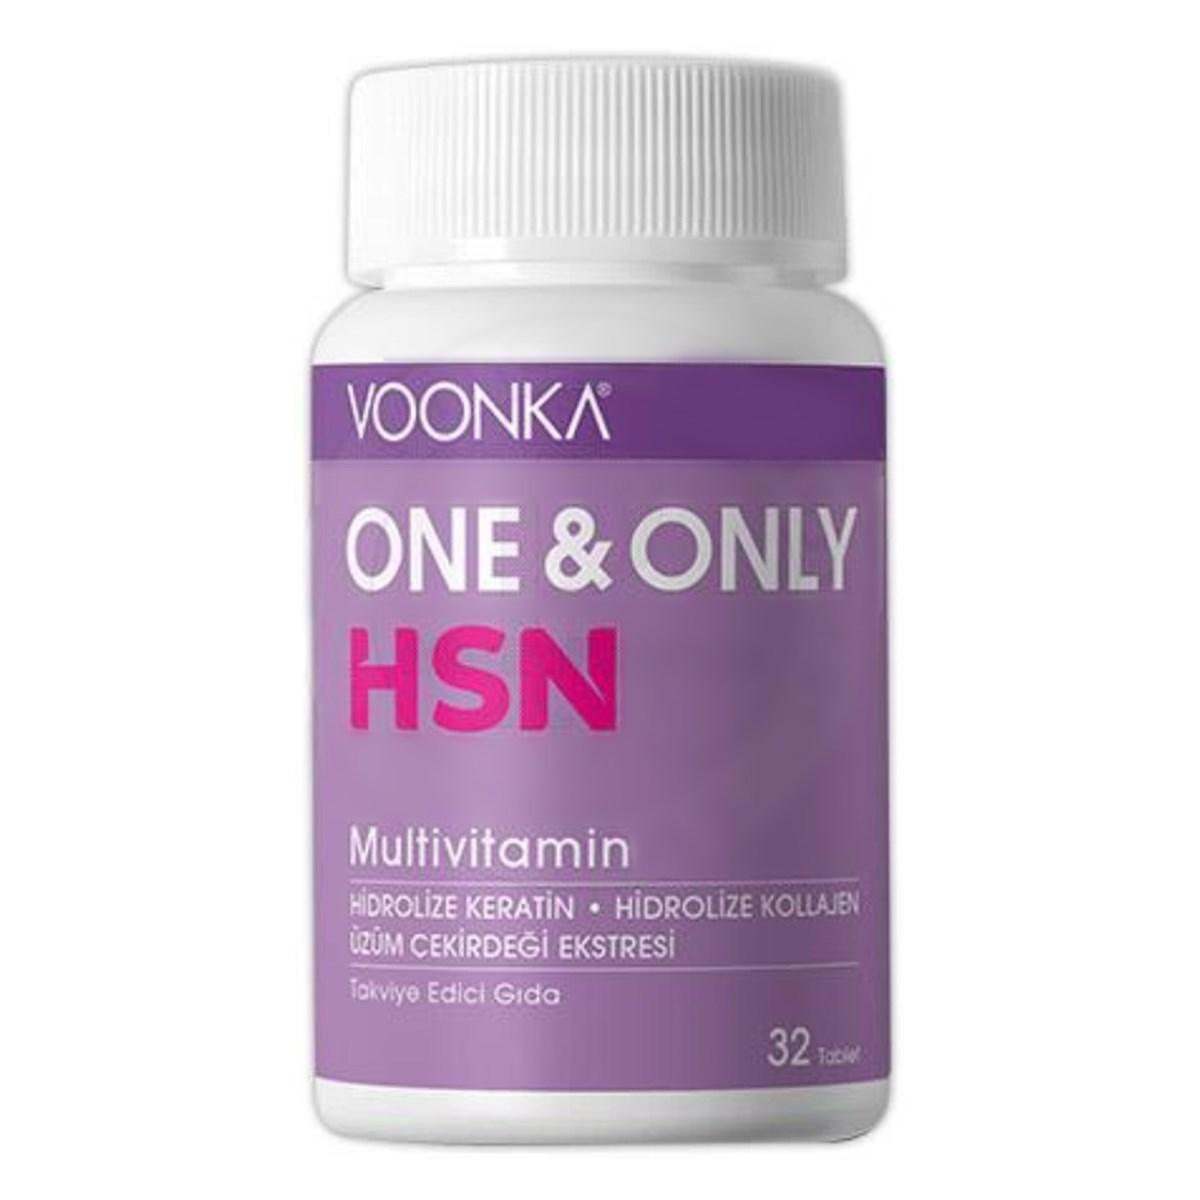 One And Only HSN Multivitamin 32 Tablet Voonka – Lujain Beauty